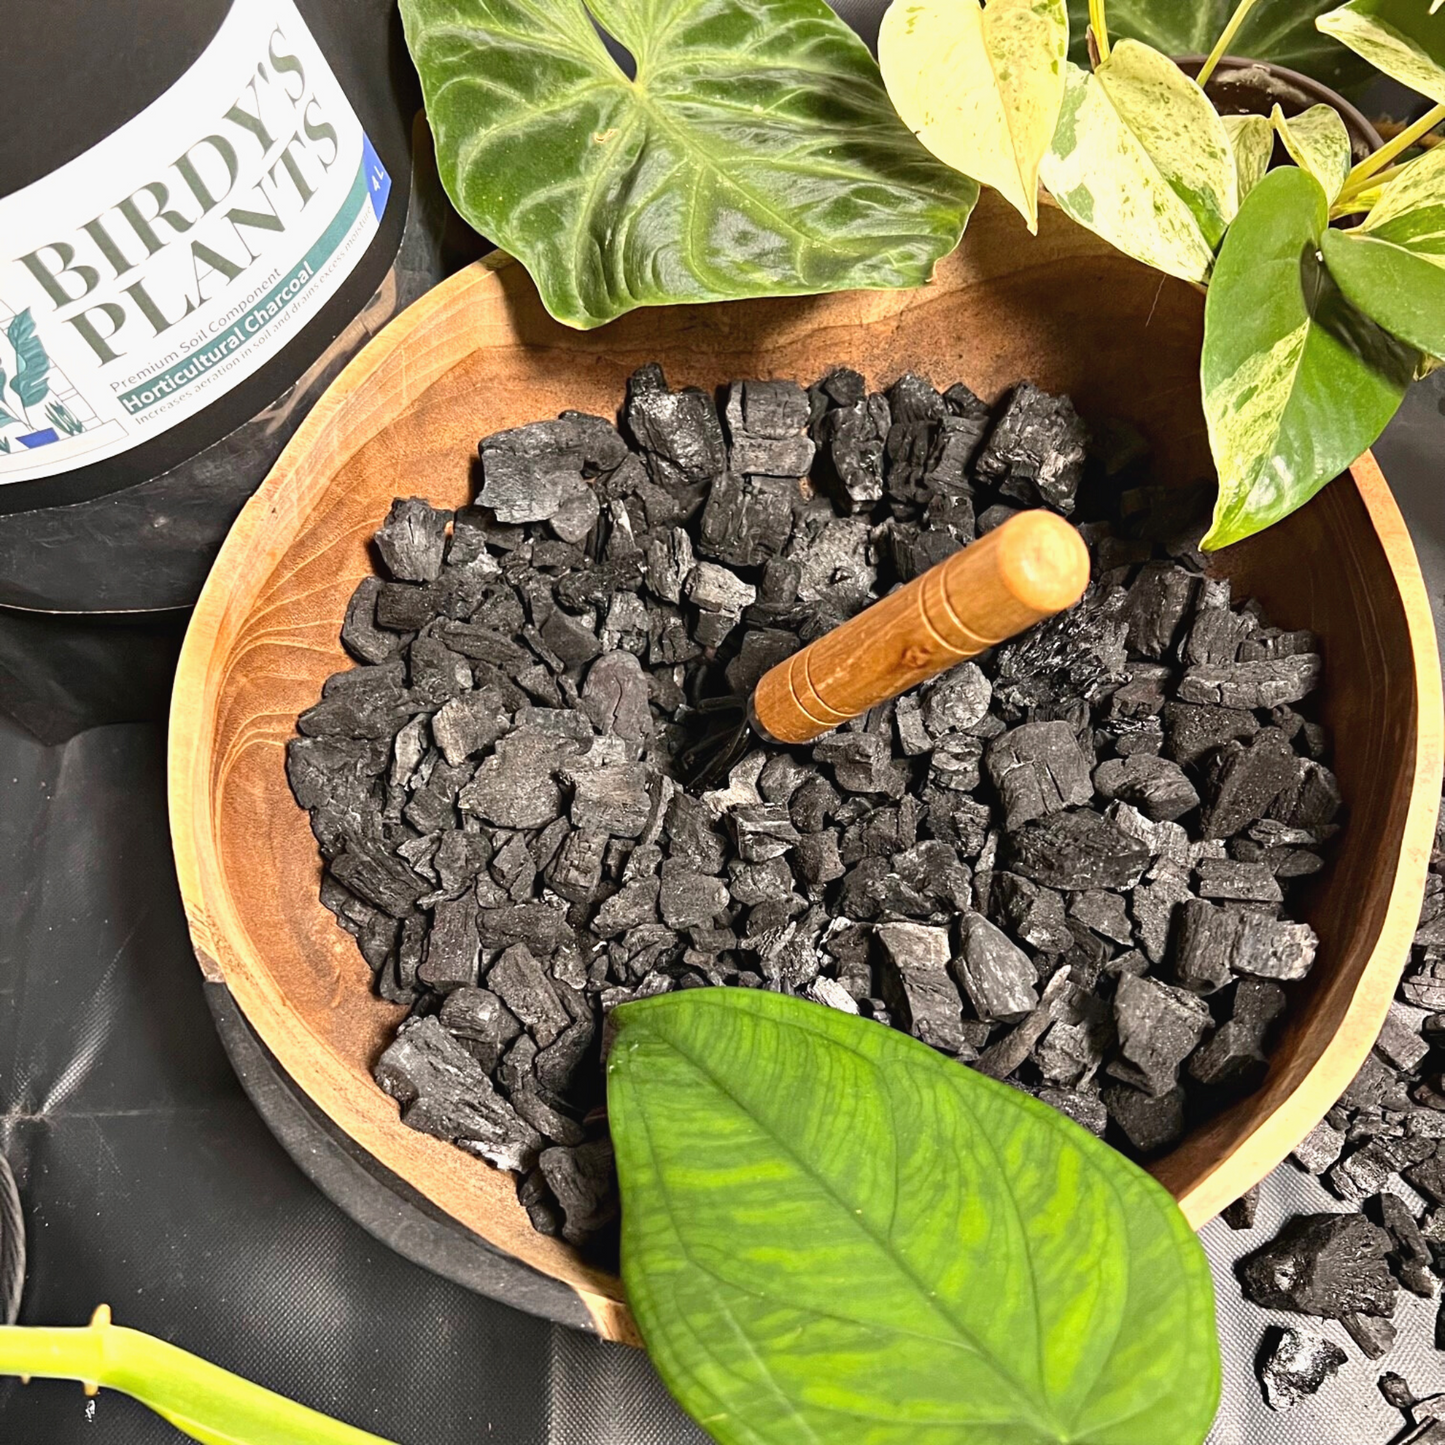 A pile of activated horticultural charcoal beside a Birdy's Plants 2L Horticultural Charcoal bag with a Philodendron Verrucosum plant, Marble Queen Pothos plant, and a Syngonium Chiapense plant in the background.